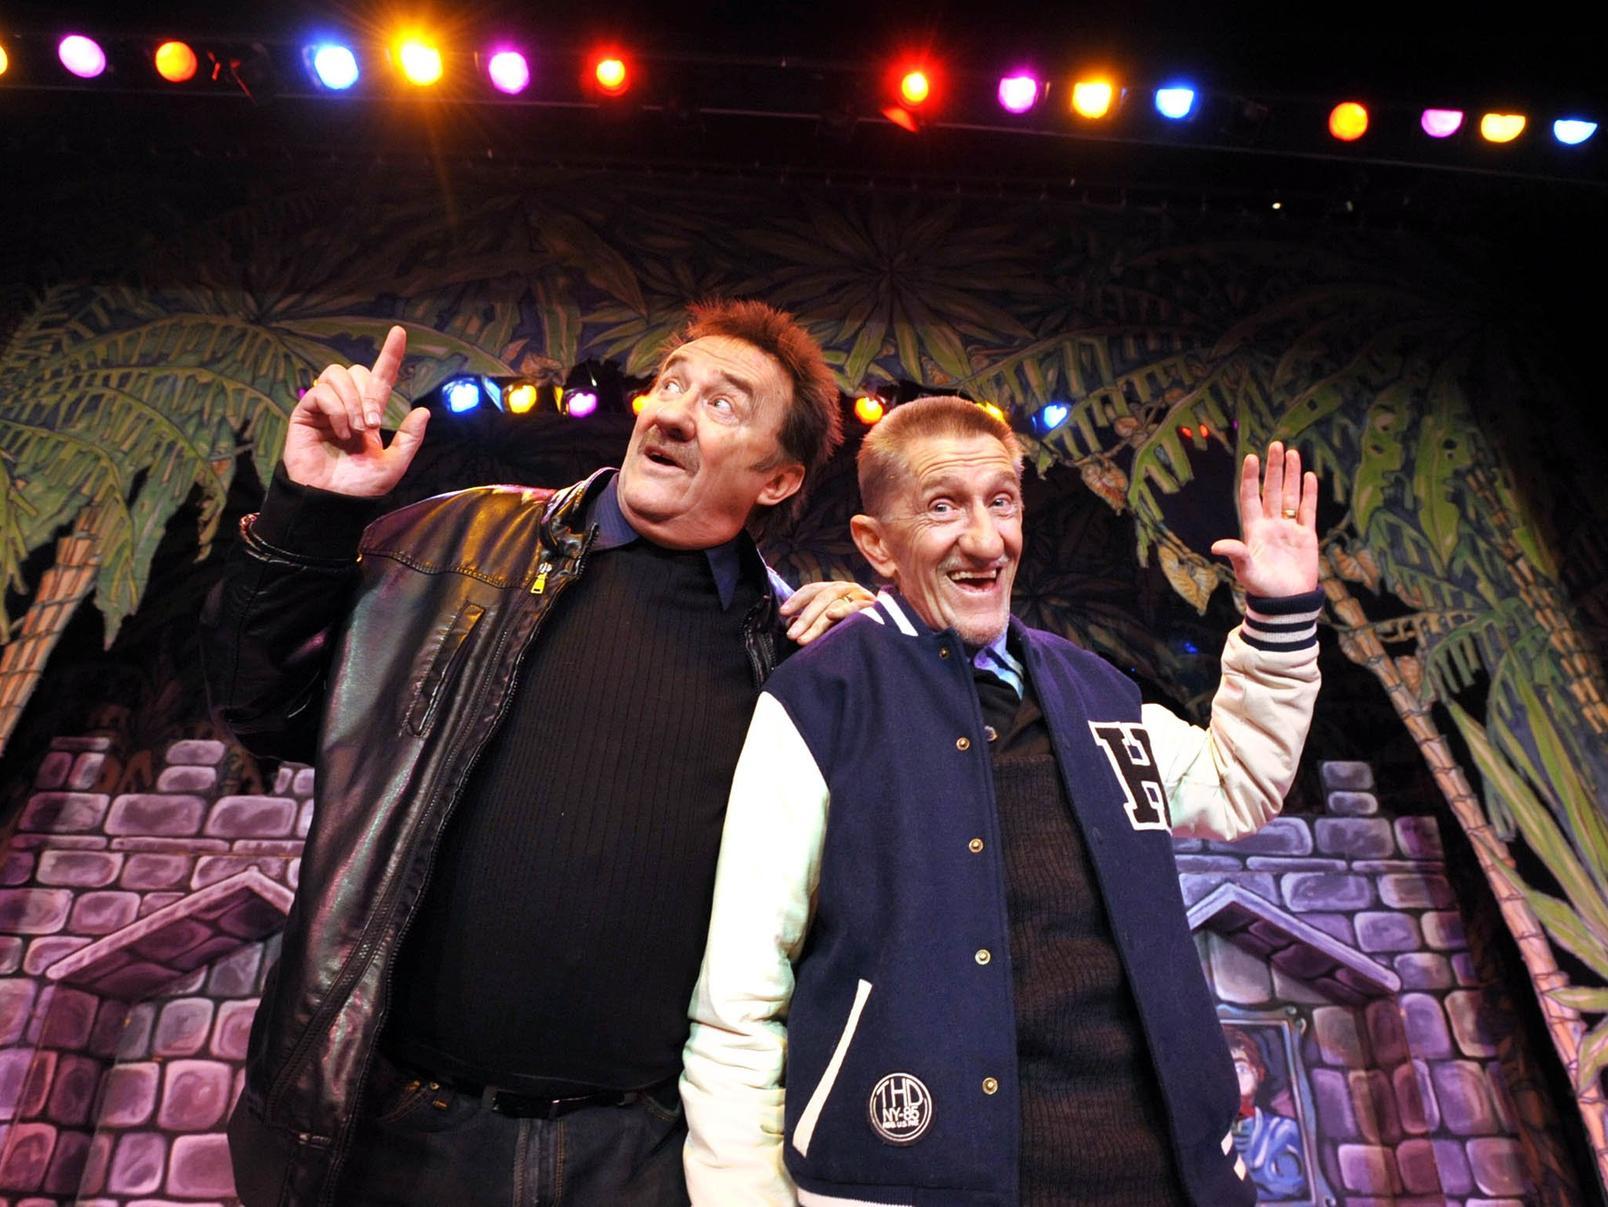 The Chuckle Brothers were no strangers to Halifax back in the 2000s with a number of performances of their many tours at the Victoria Theatre.